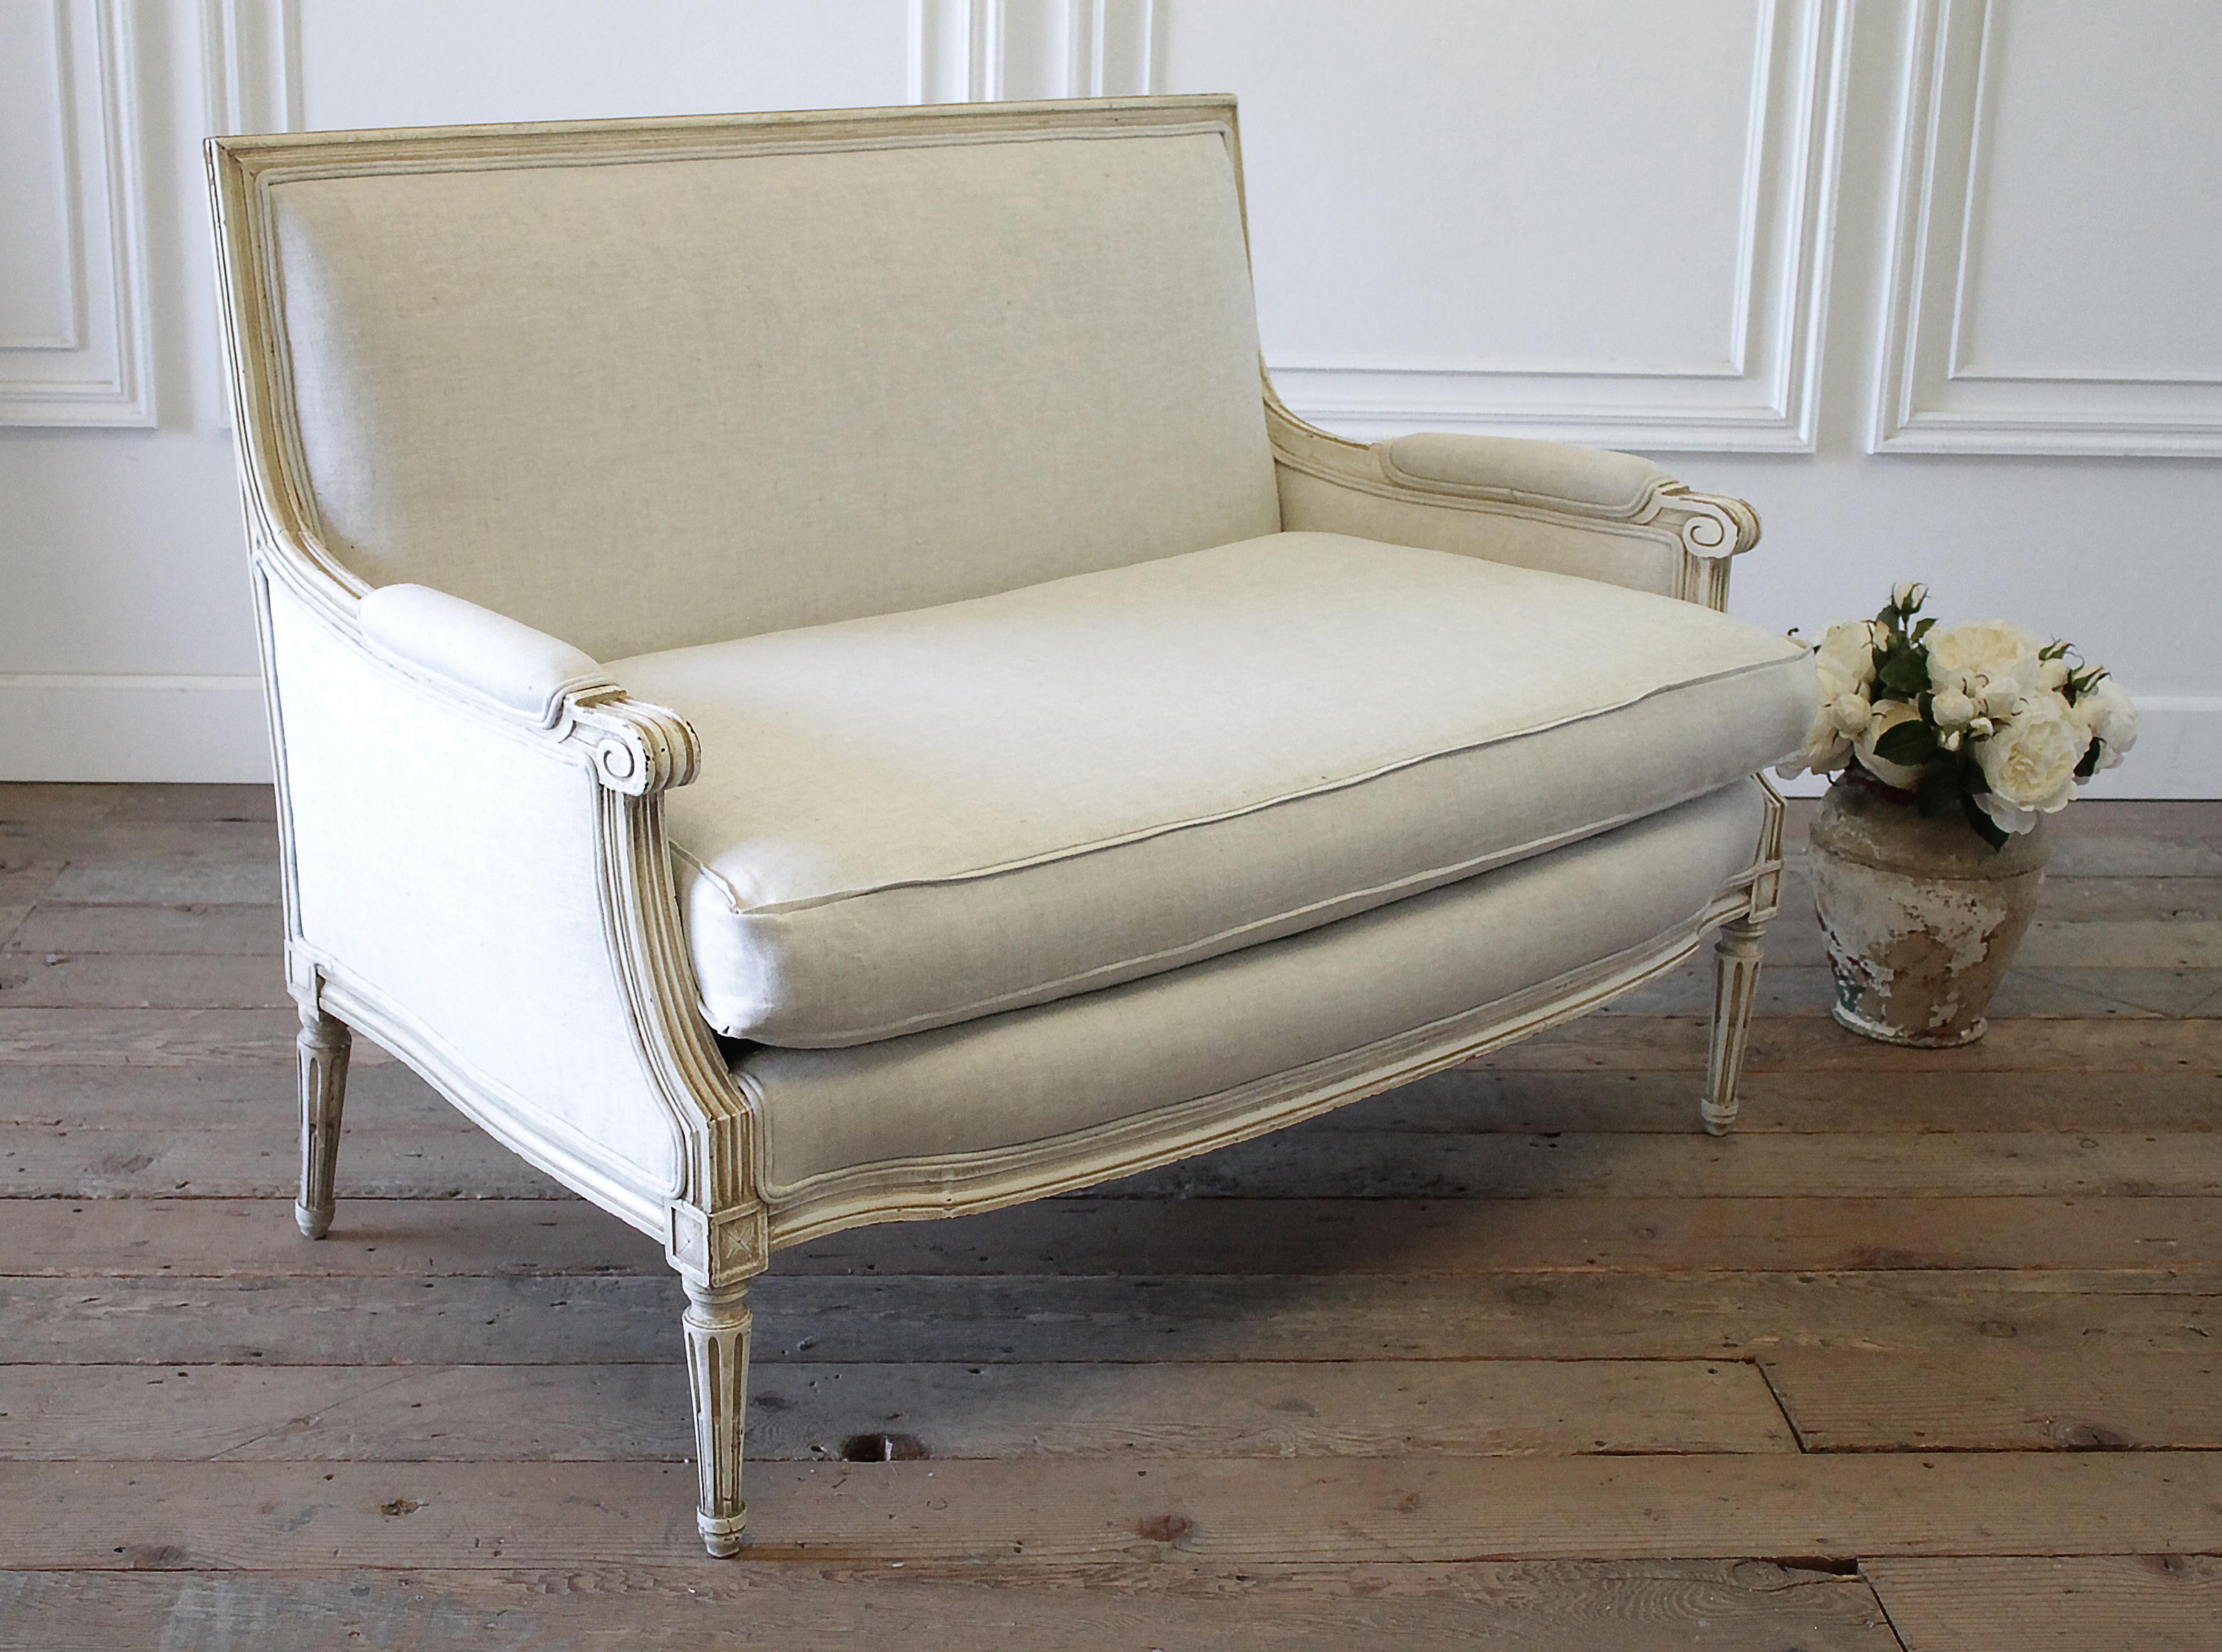 20th century Louis XVI style upholstered linen settee
Original painted finish in a natural and creamy white color, with beautiful patina slightly faded paint with subtle distressed edges. We reupholstered this settee in a thick Belgian linen, a